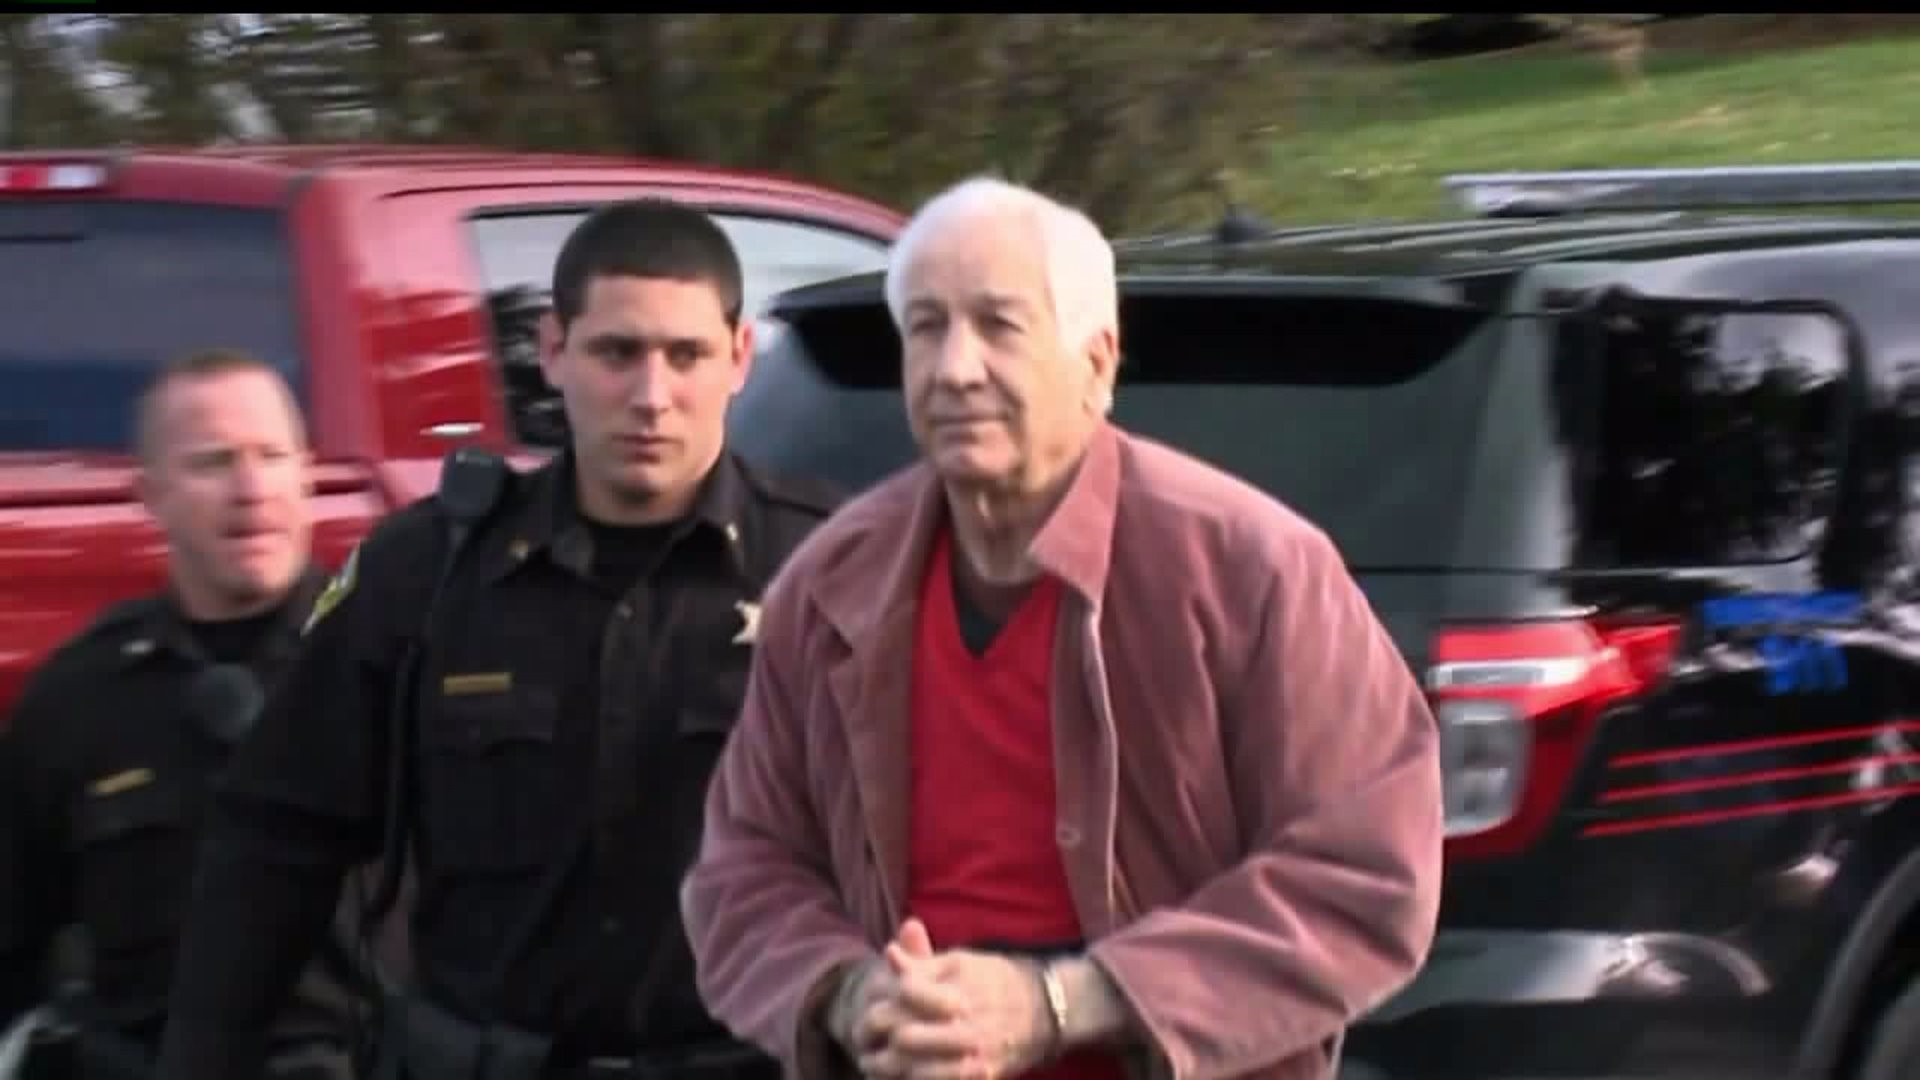 Former Penn State assistant football coach Jerry Sandusky is scheduled back in court today